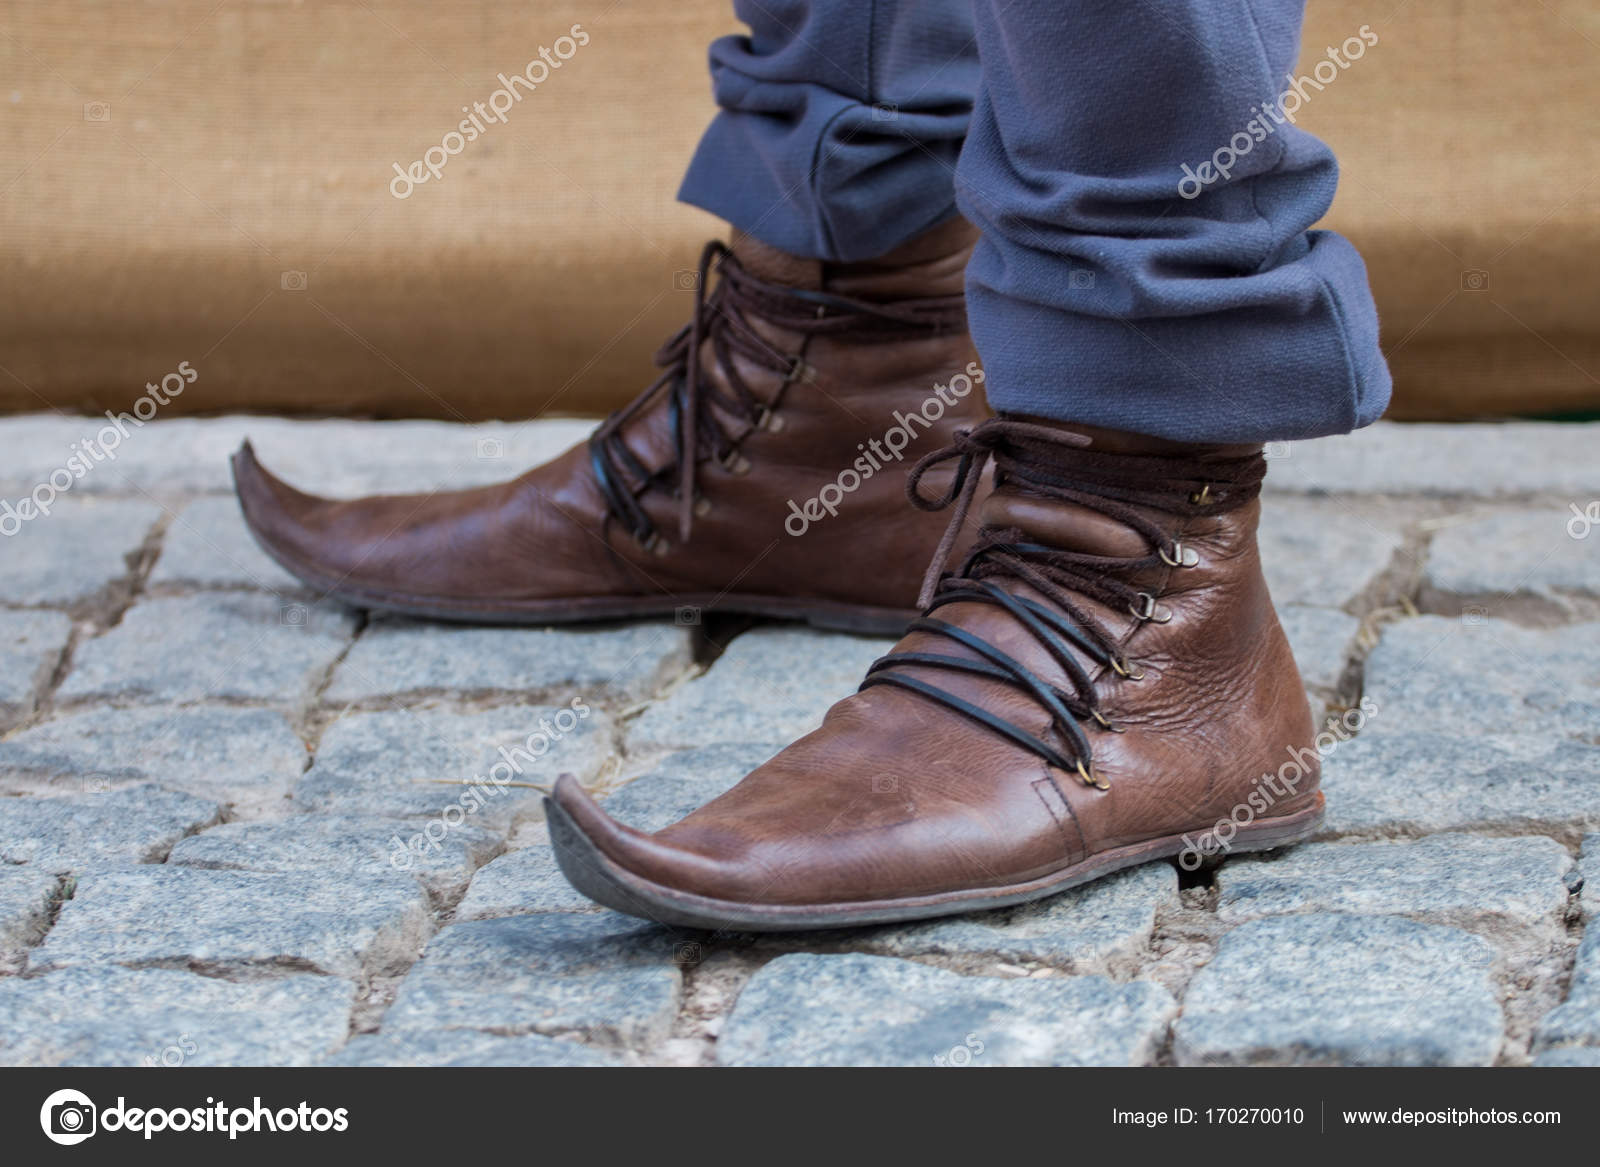 Pointy medieval shoes — Stock Photo 